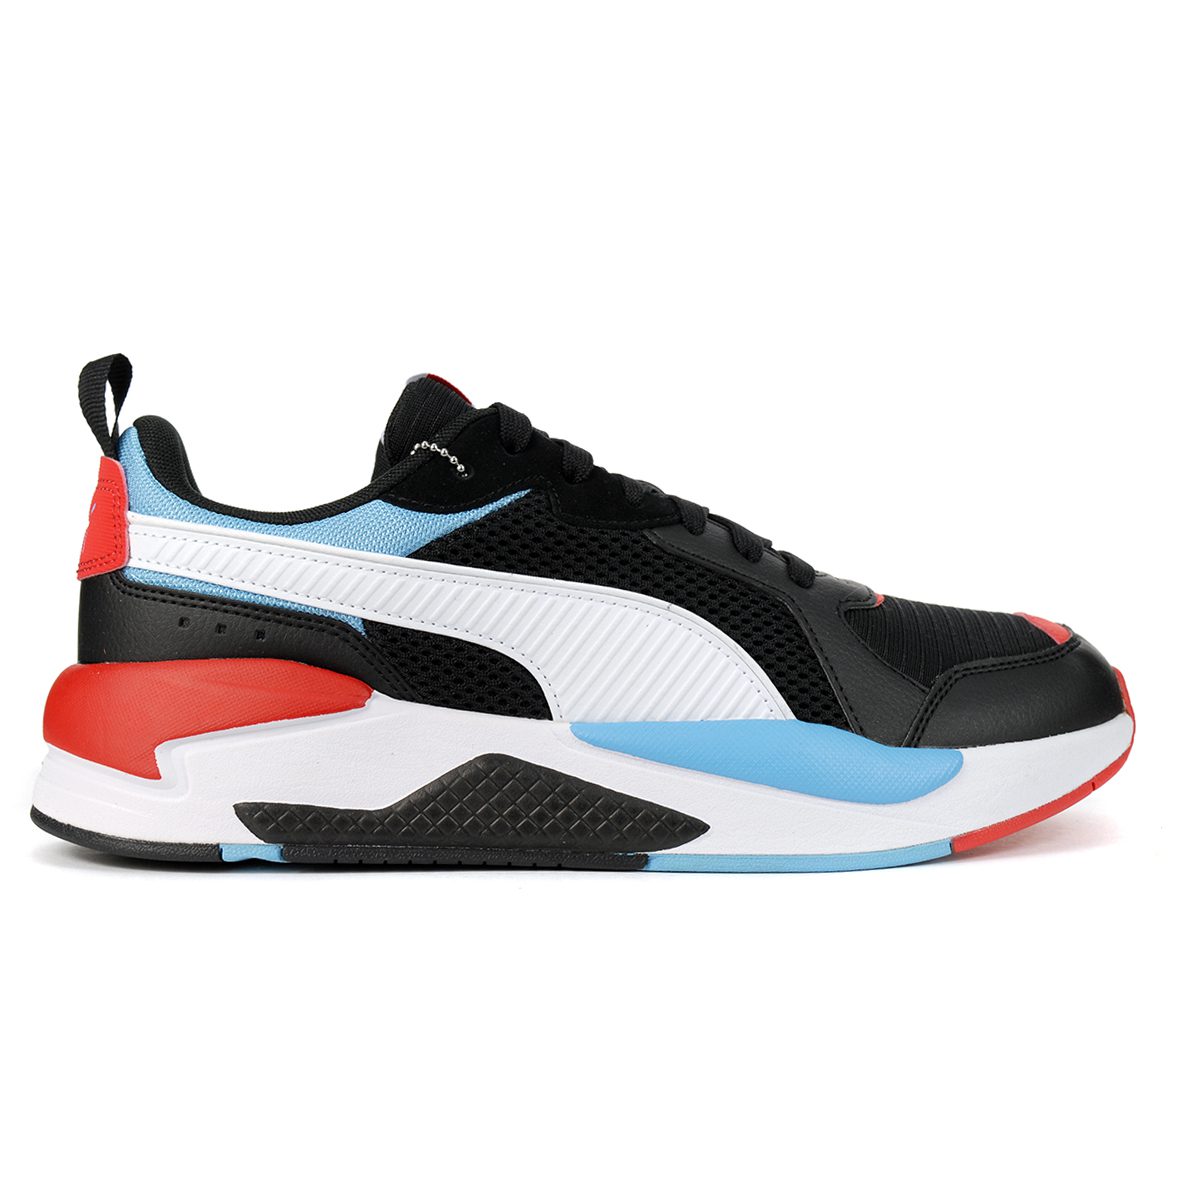 Puma Men's X-Ray Color Block Black/White/Ethereal Blue/High Risk Red ...